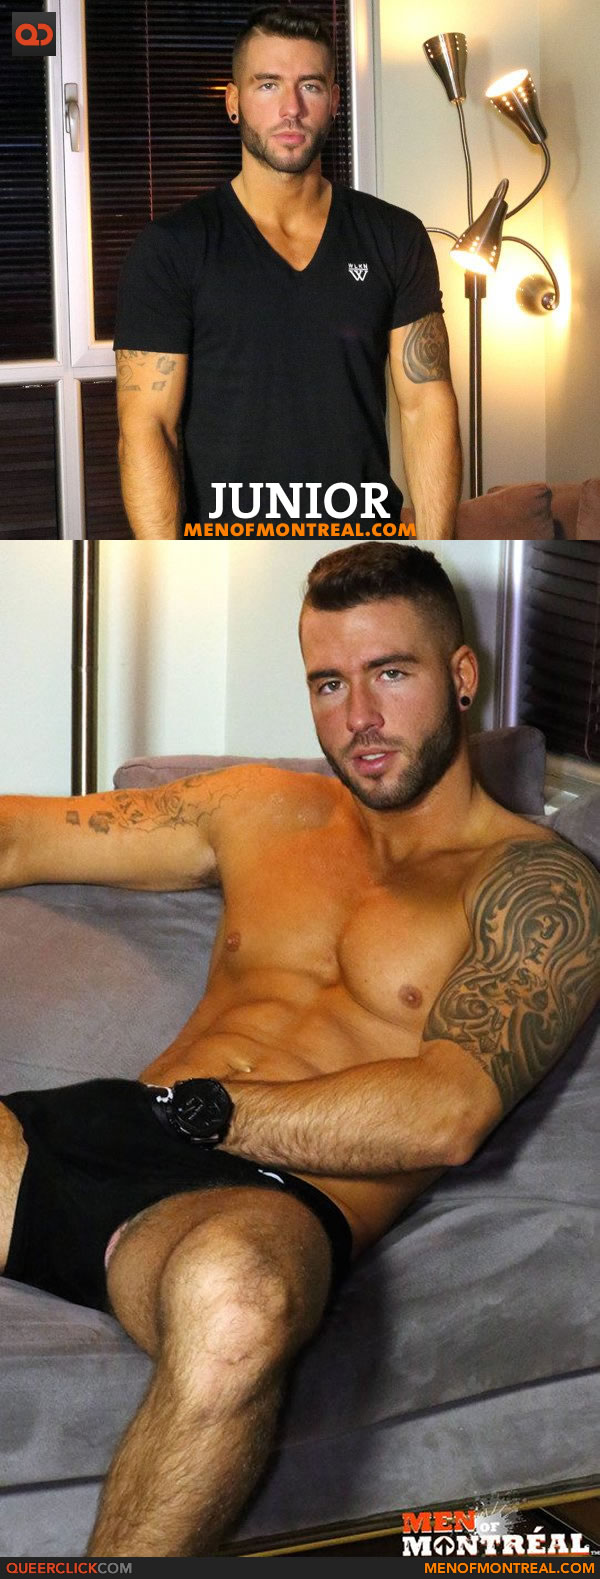 menofmontreal-junior-first-time-1